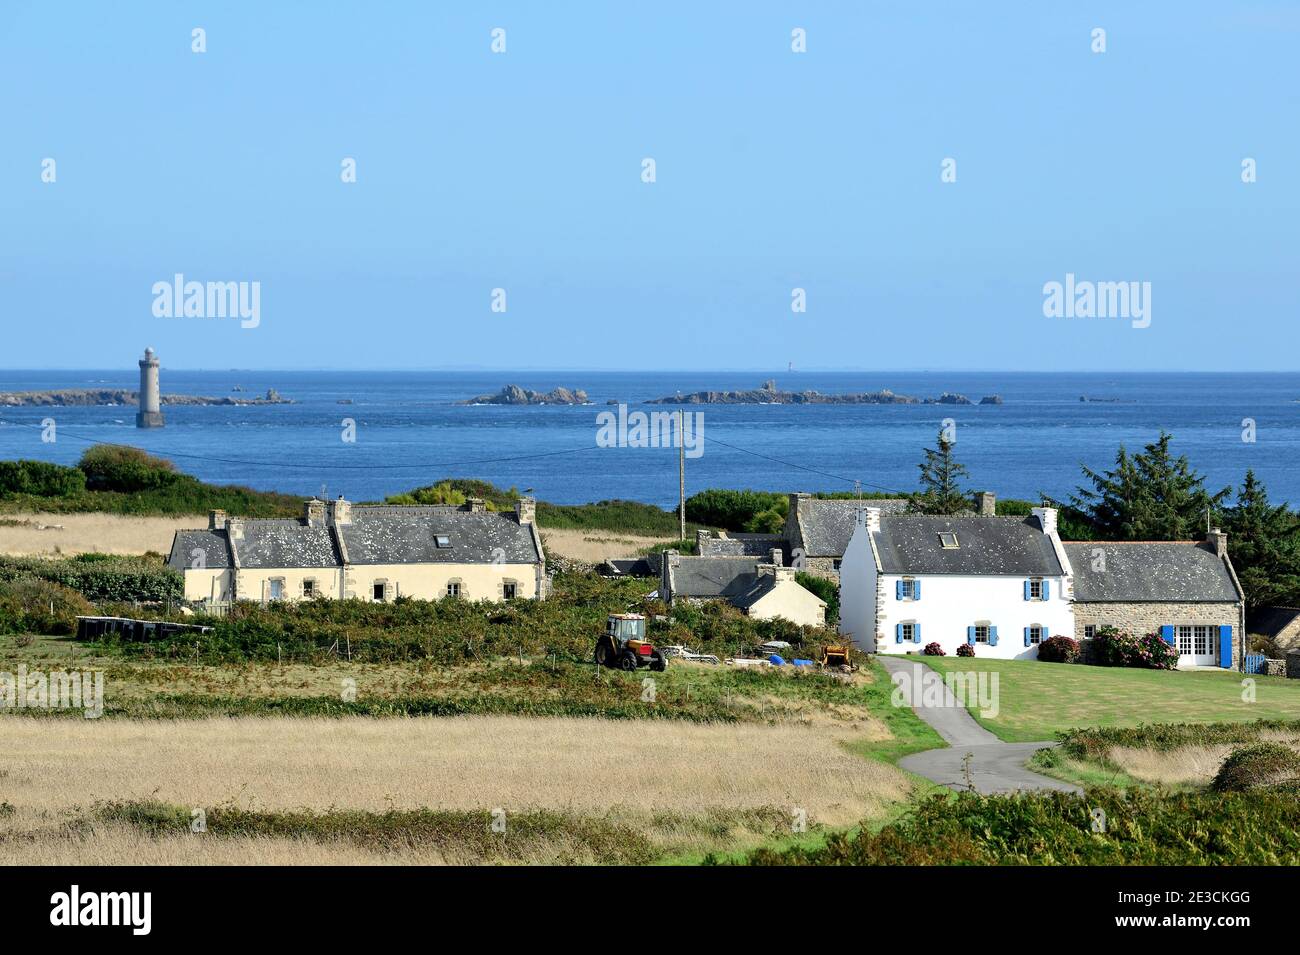 Ile d'Ouessant, Ushant Island (off the coasts of Brittany, north-western France): traditional houses on the island and agricultural plots Stock Photo